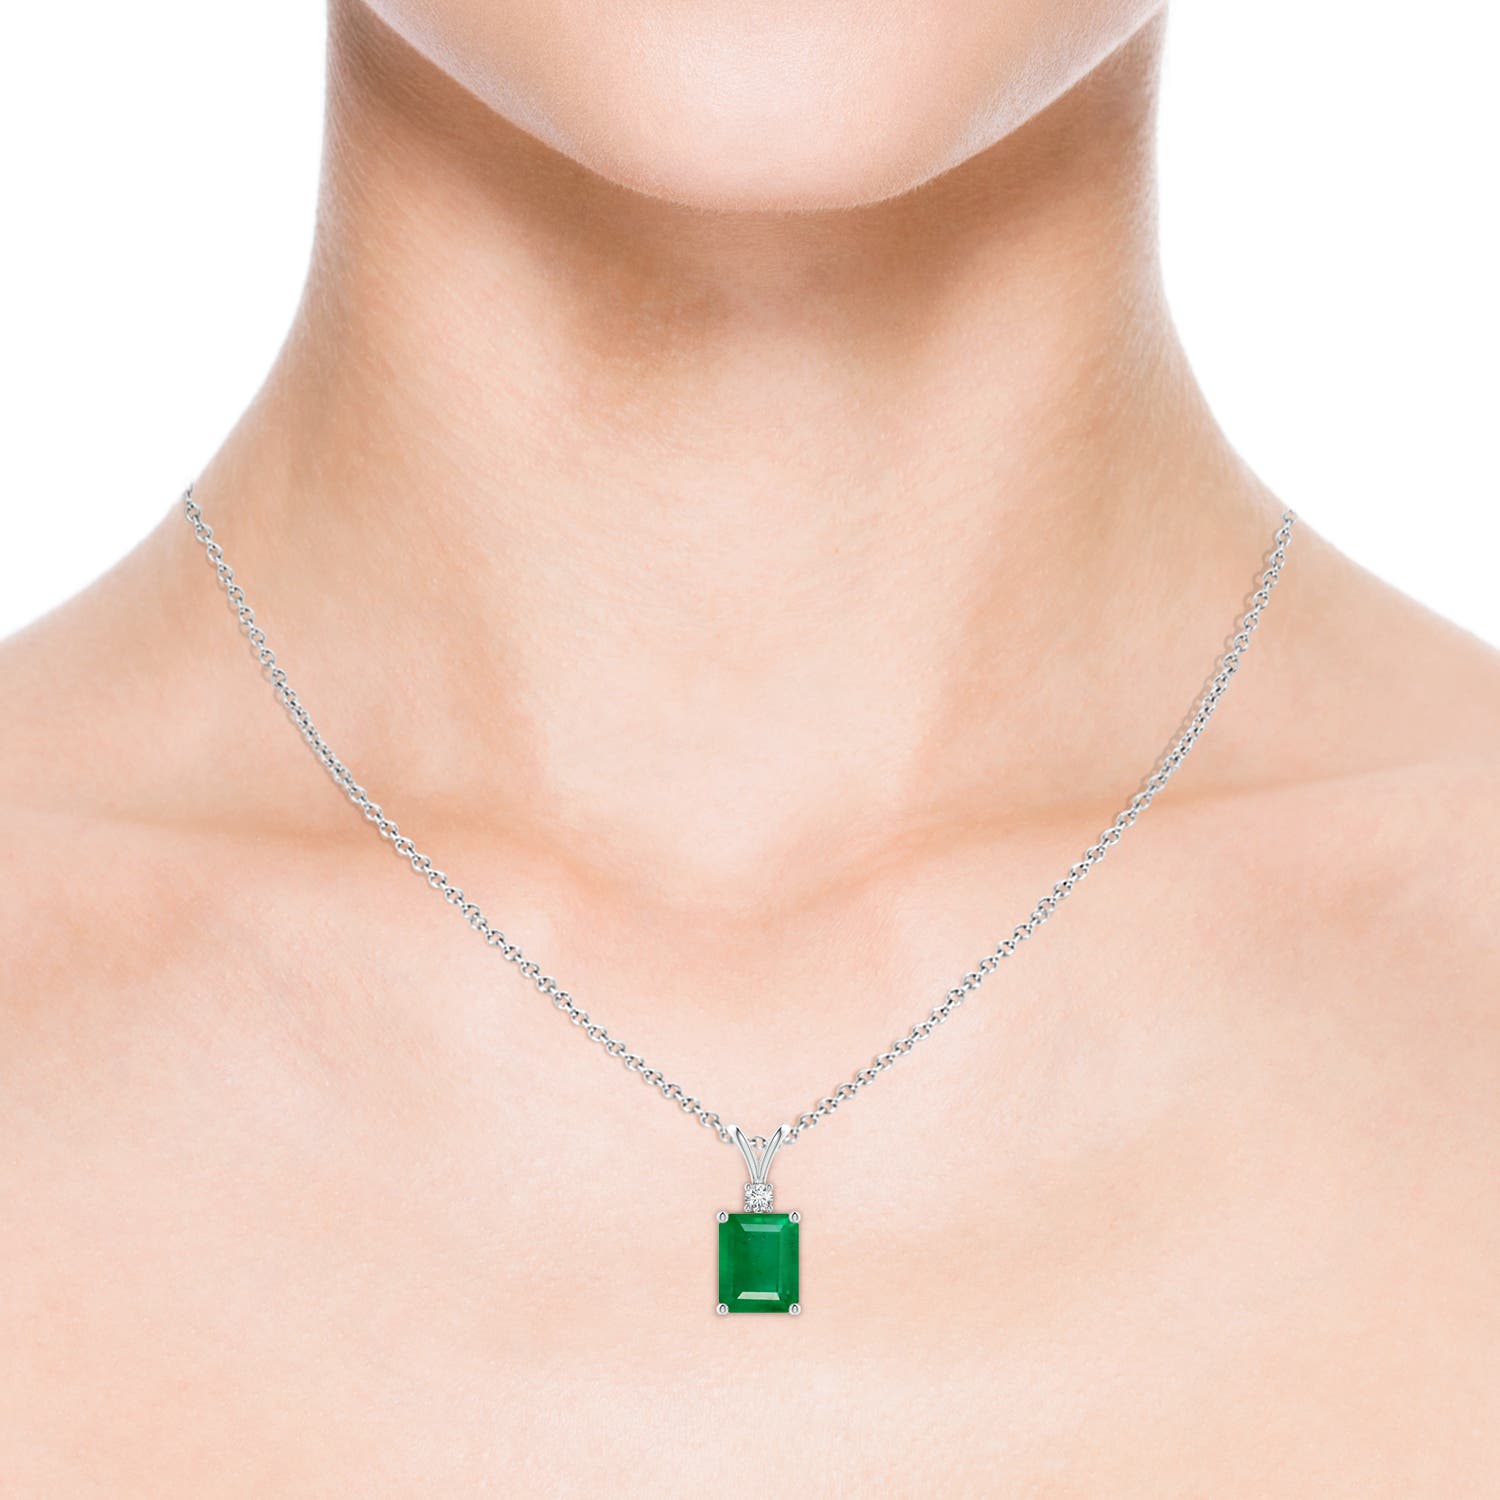 AA - Emerald / 2.96 CT / 14 KT White Gold